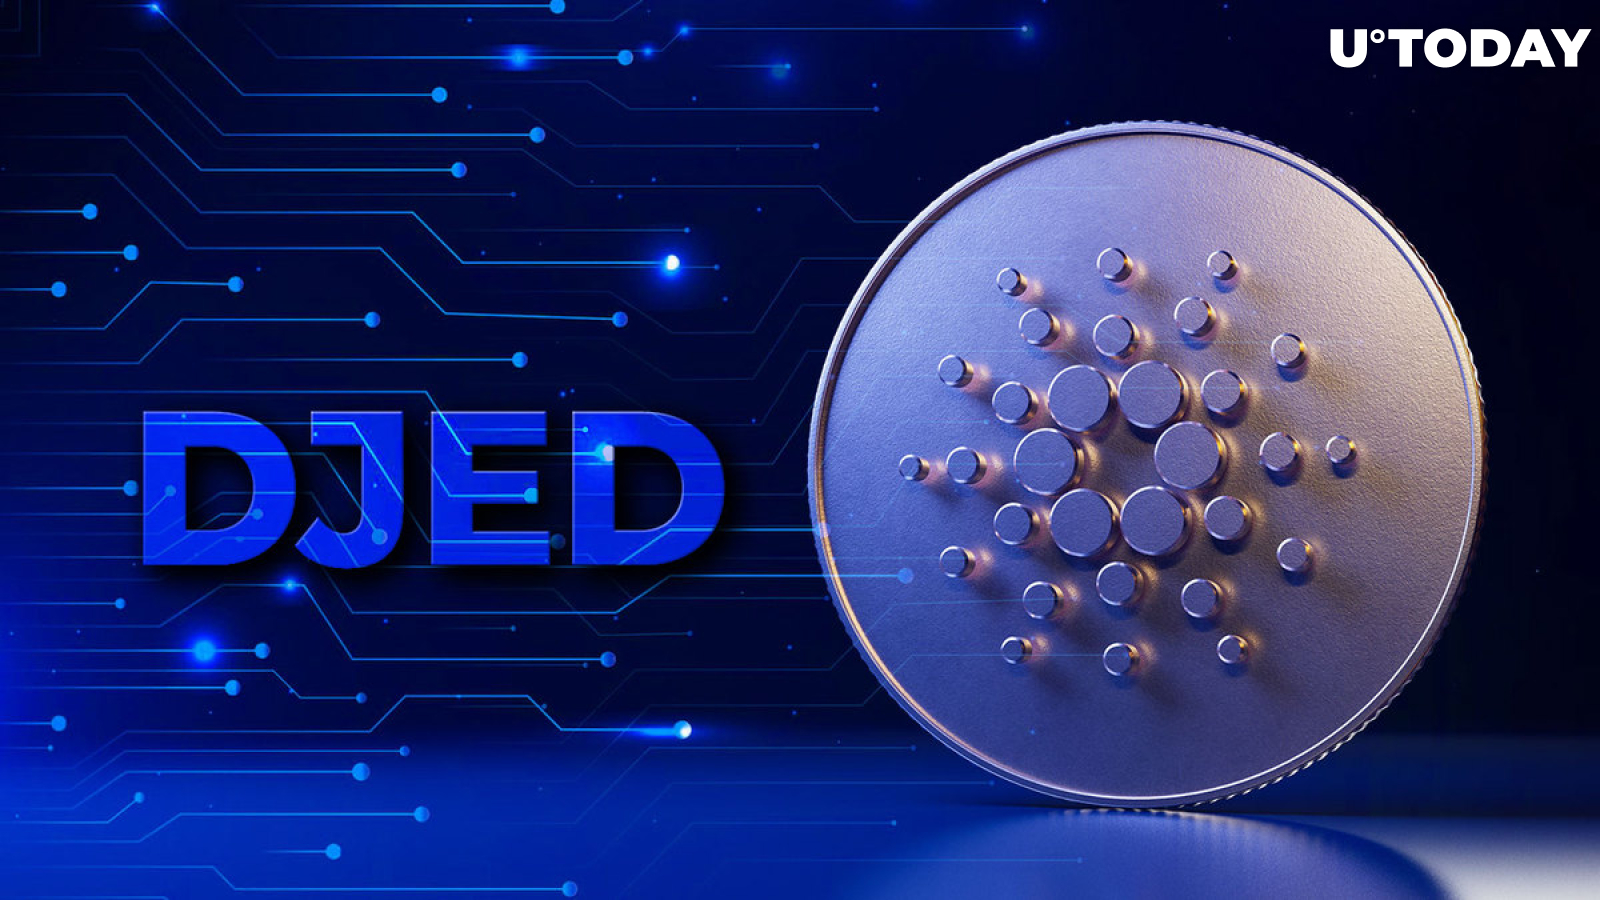 Cardano (ADA) to Launch Djed, Here’s What You Should Know About Algorithmic Stablecoin